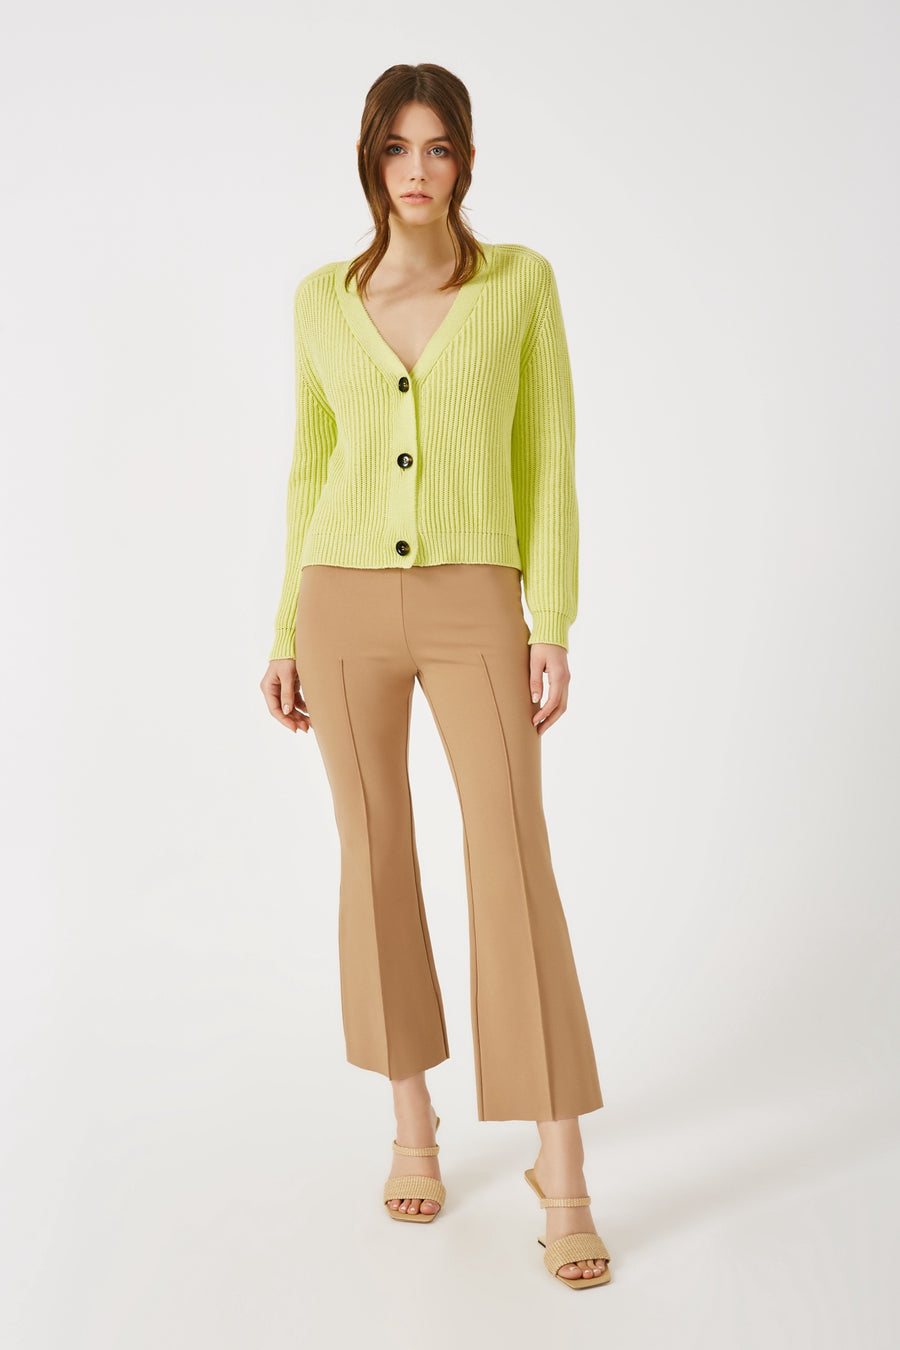 THE OLIPHANT CARDIGAN - CHARTREUSE